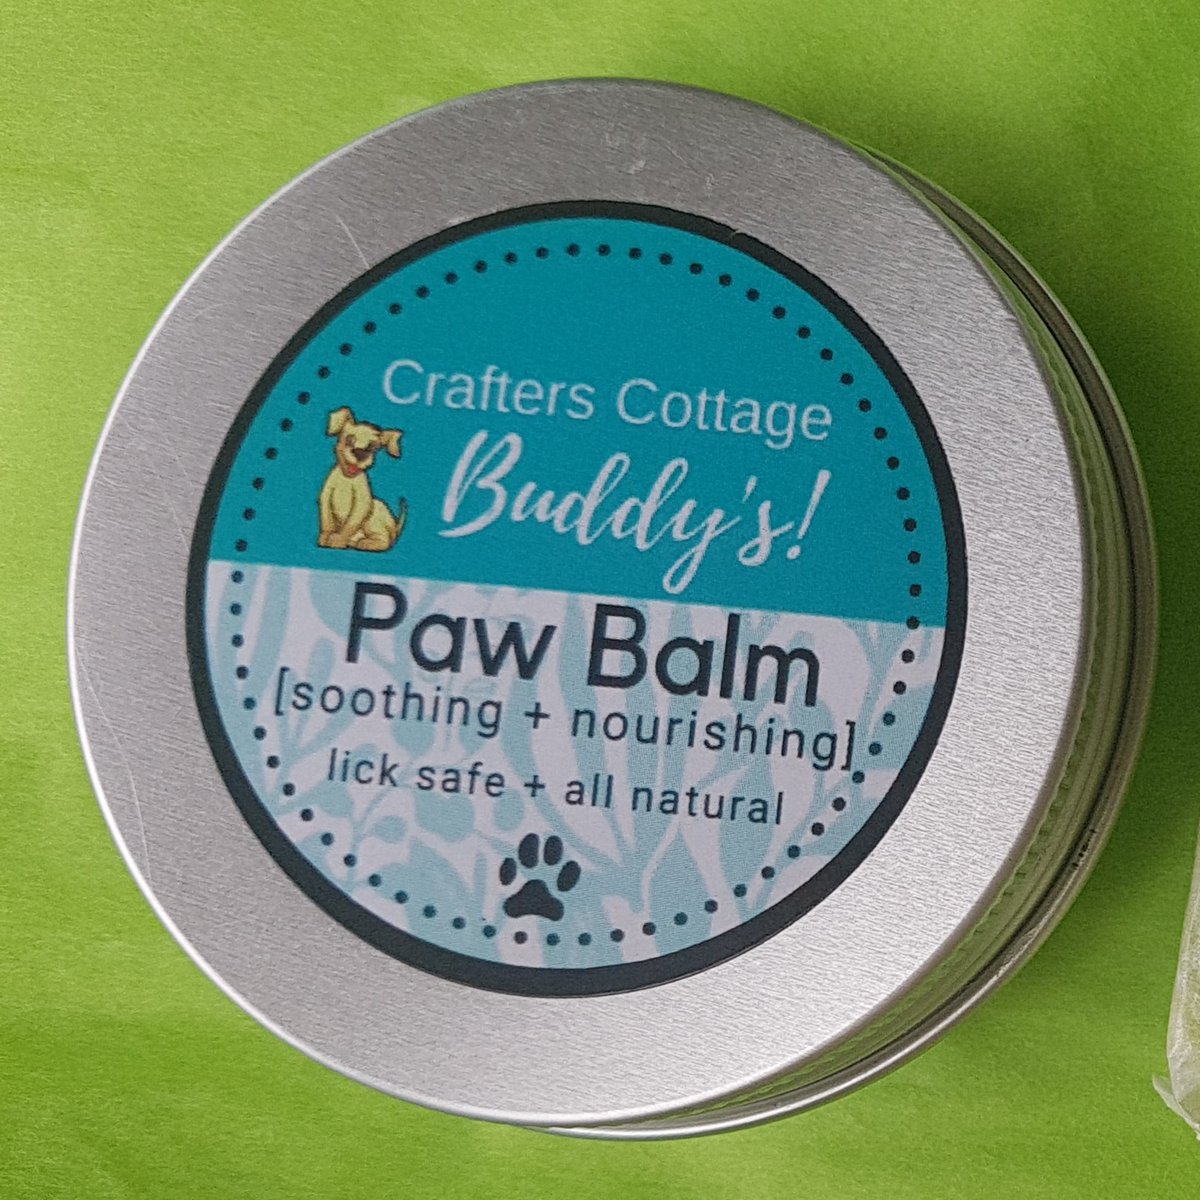 🐾 HOT OFF THE PAWS - we mean press! 🐾 Introducing Buddy's All Natural Lick-safe Paw Balm. Pop in-store for more info & to purchase a pot for your pooch.

#DogsOfTwitter #GiftsForDogs #PawBalm #NaturalPawBalm #Pets #ILoveMyDog #Honley #Dogwalker #DogFriendly #BuddyBalm